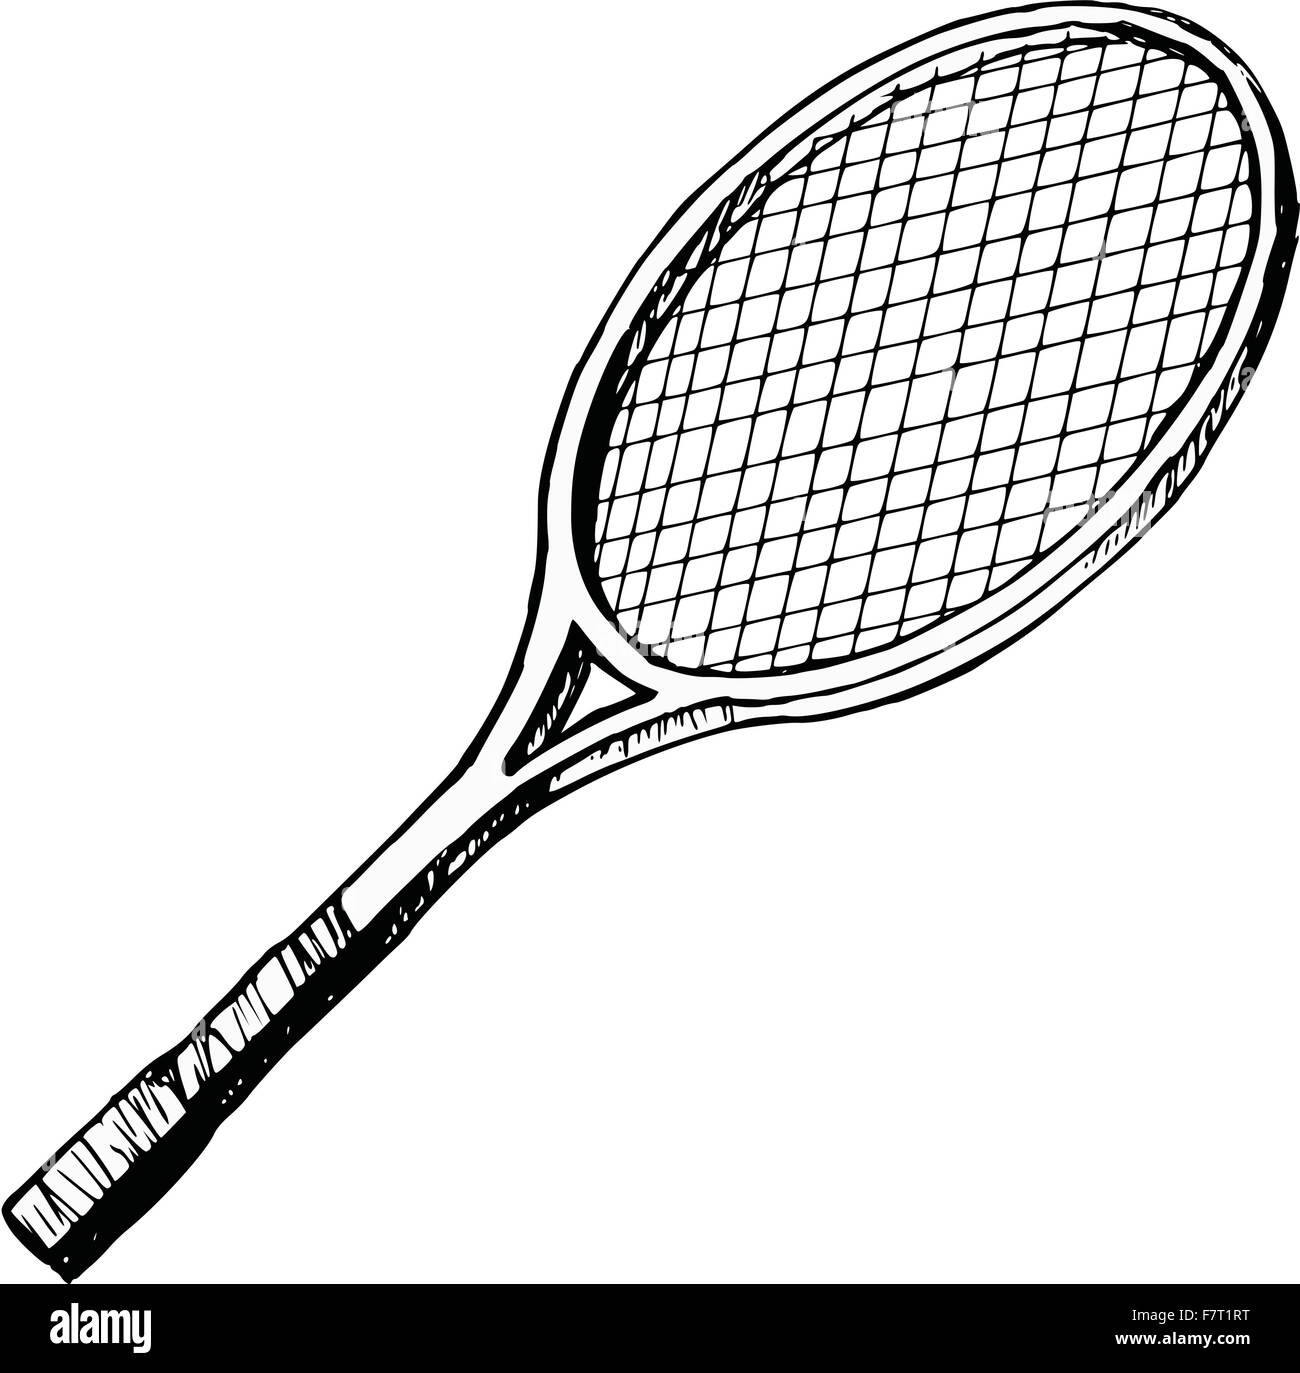 Table tennis bat Black and White Stock Photos & Images - Alamy